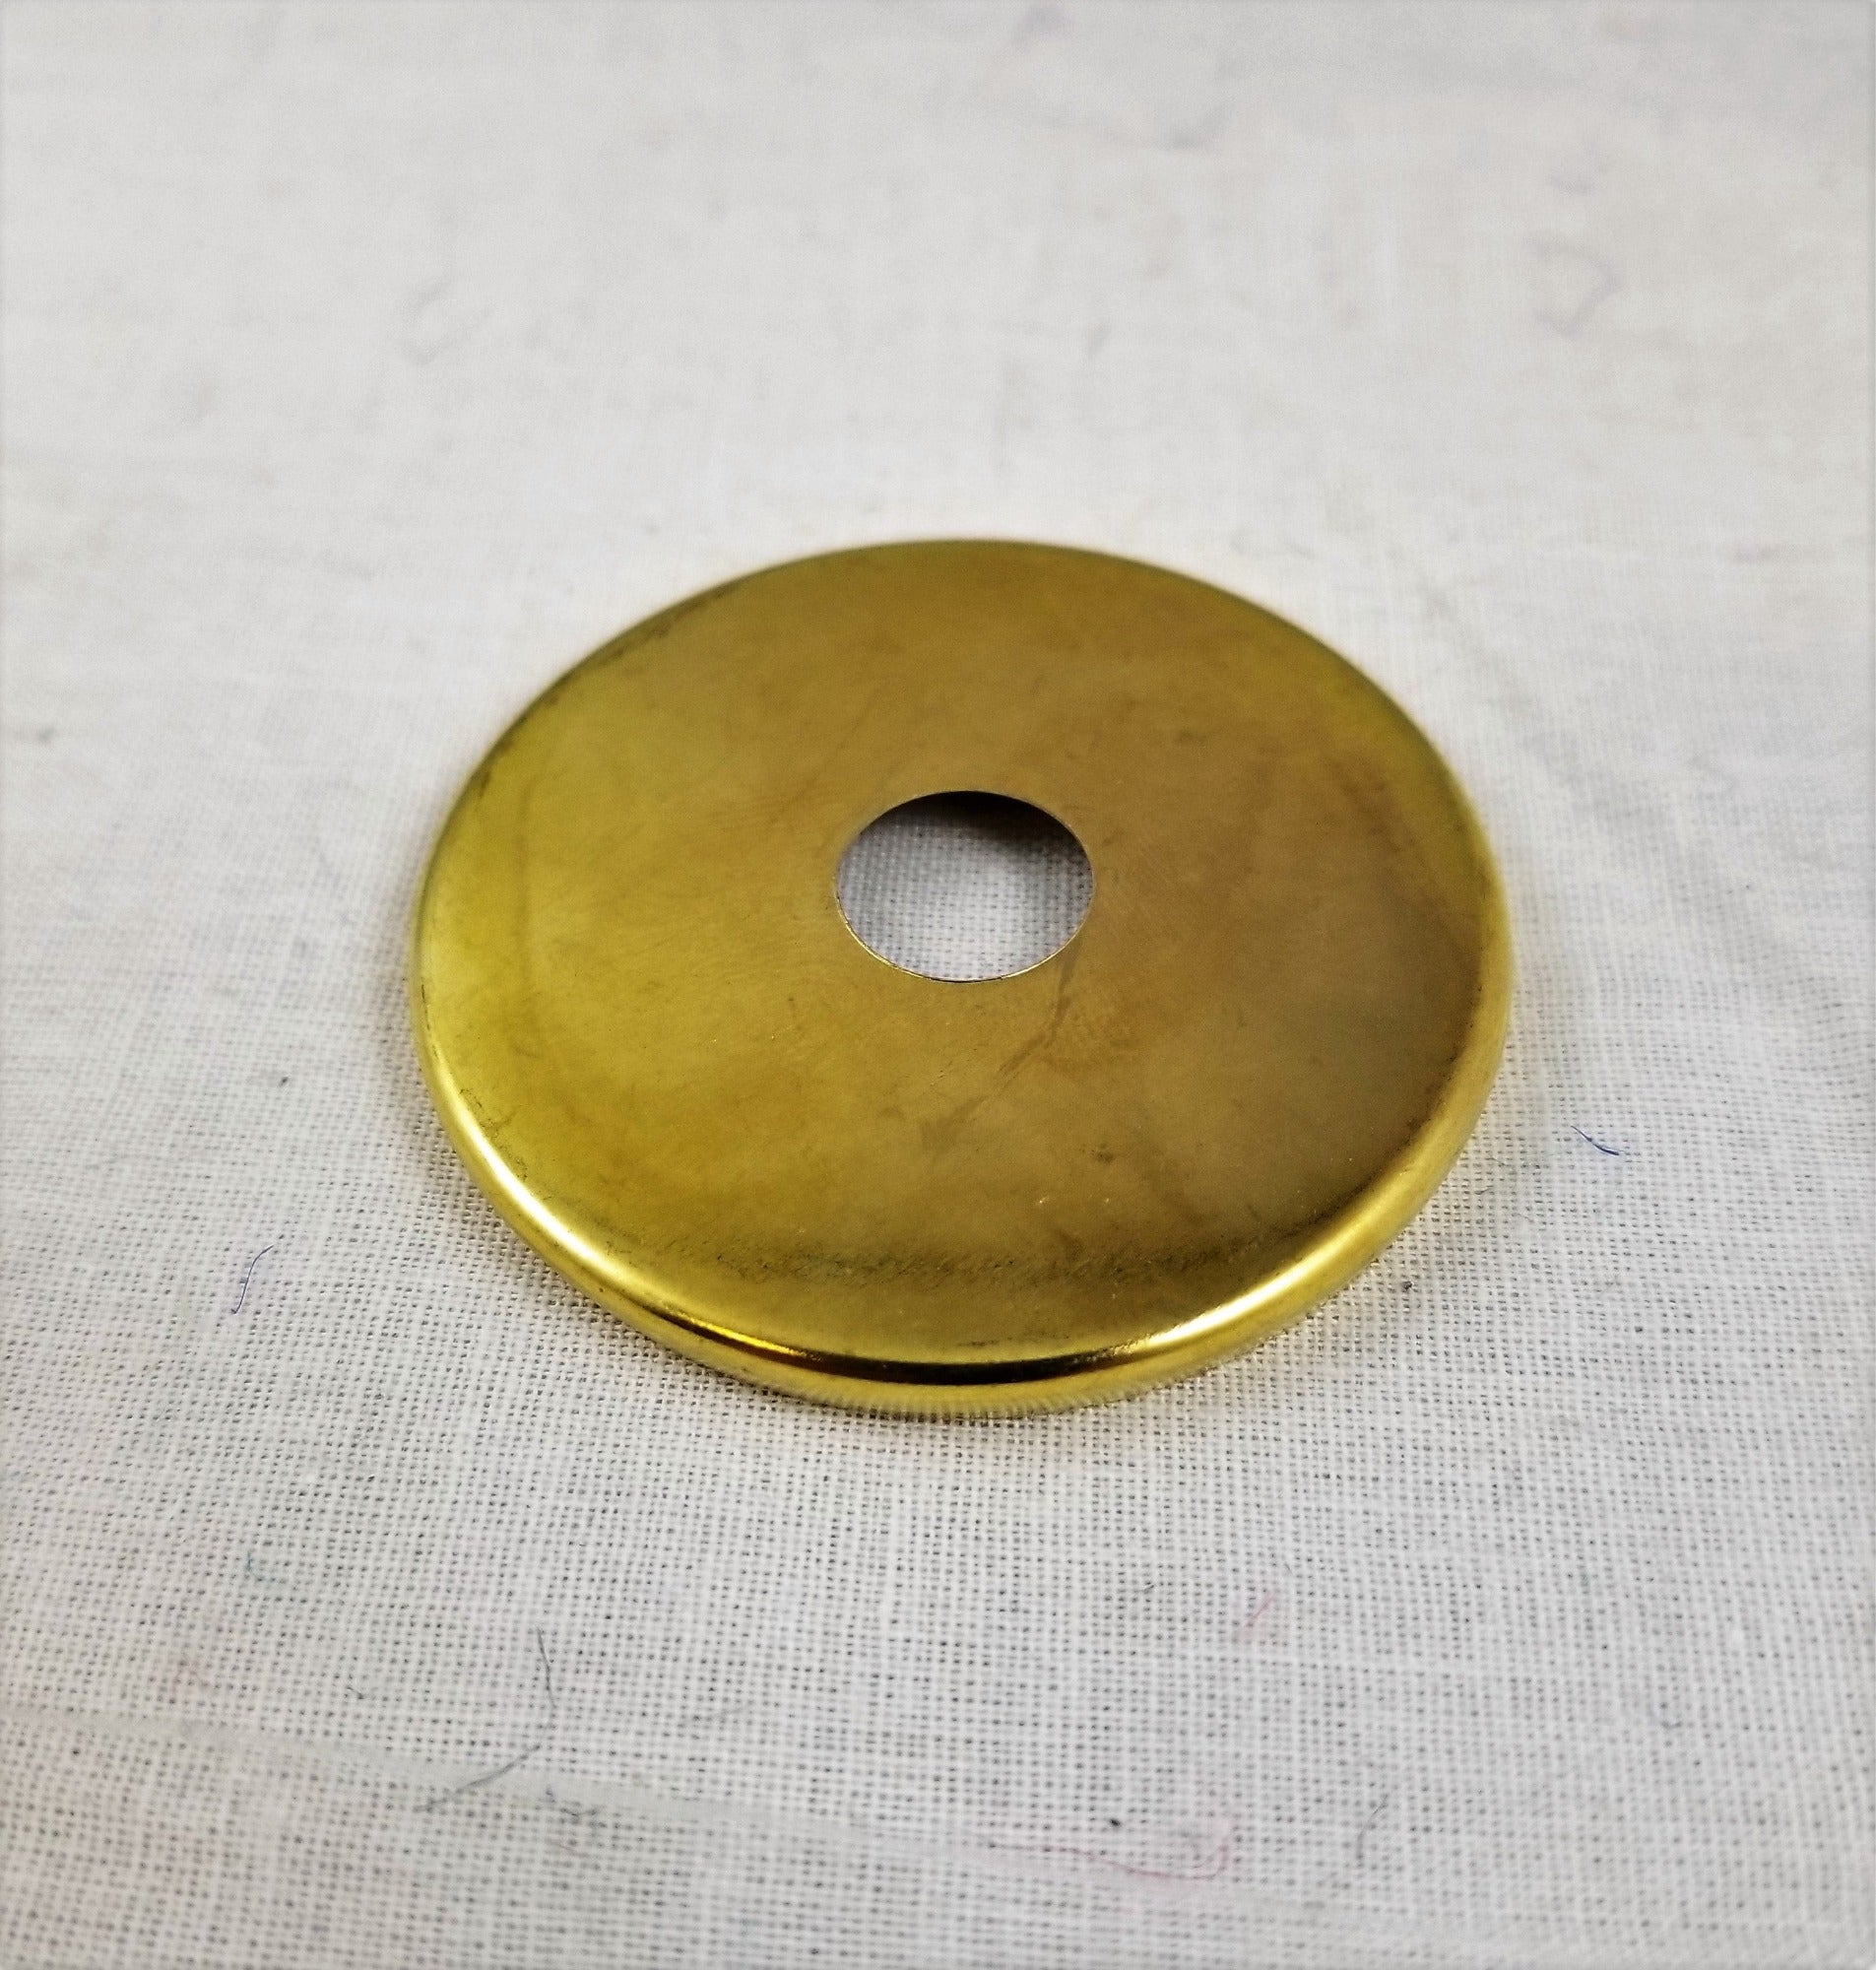 3/8" center hole steel check ring in brass plating